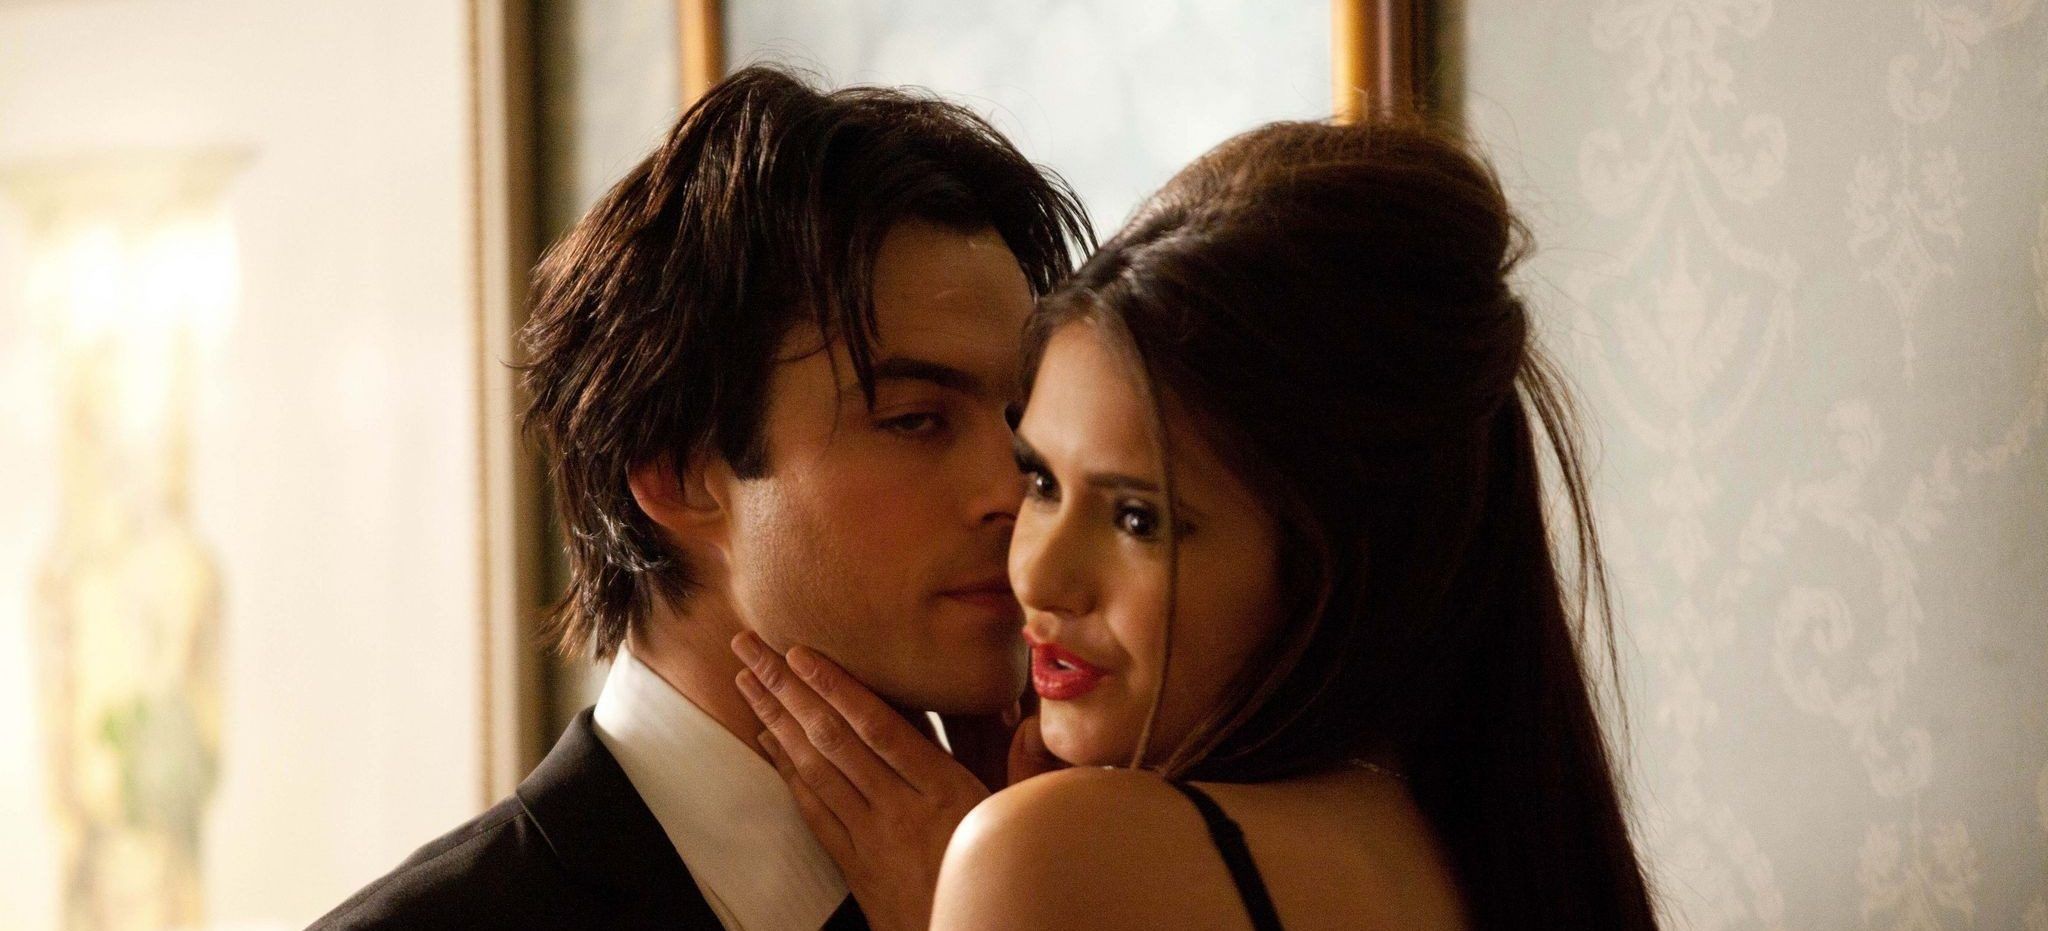 The Vampire Diaries 25 Couples Ranked (And How Long They Lasted)